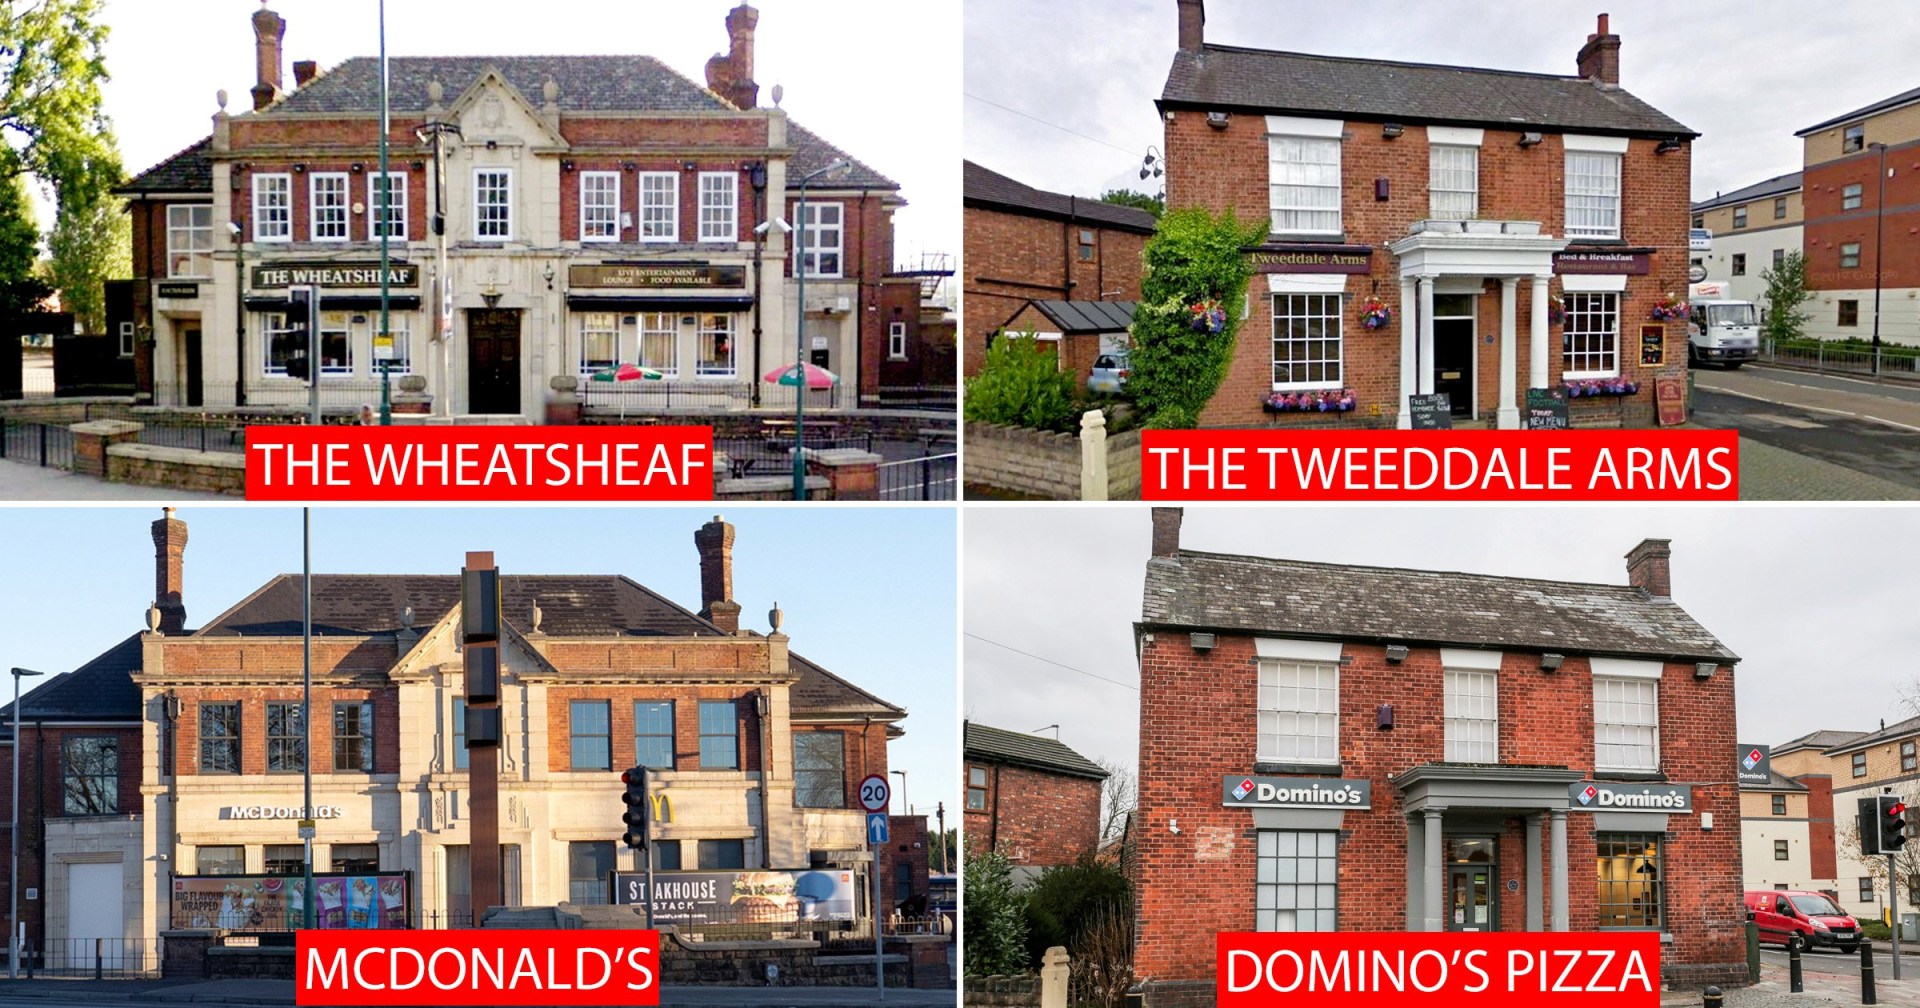 uk's pub crisis laid bare with shops and takeaways taking over our lost boozers